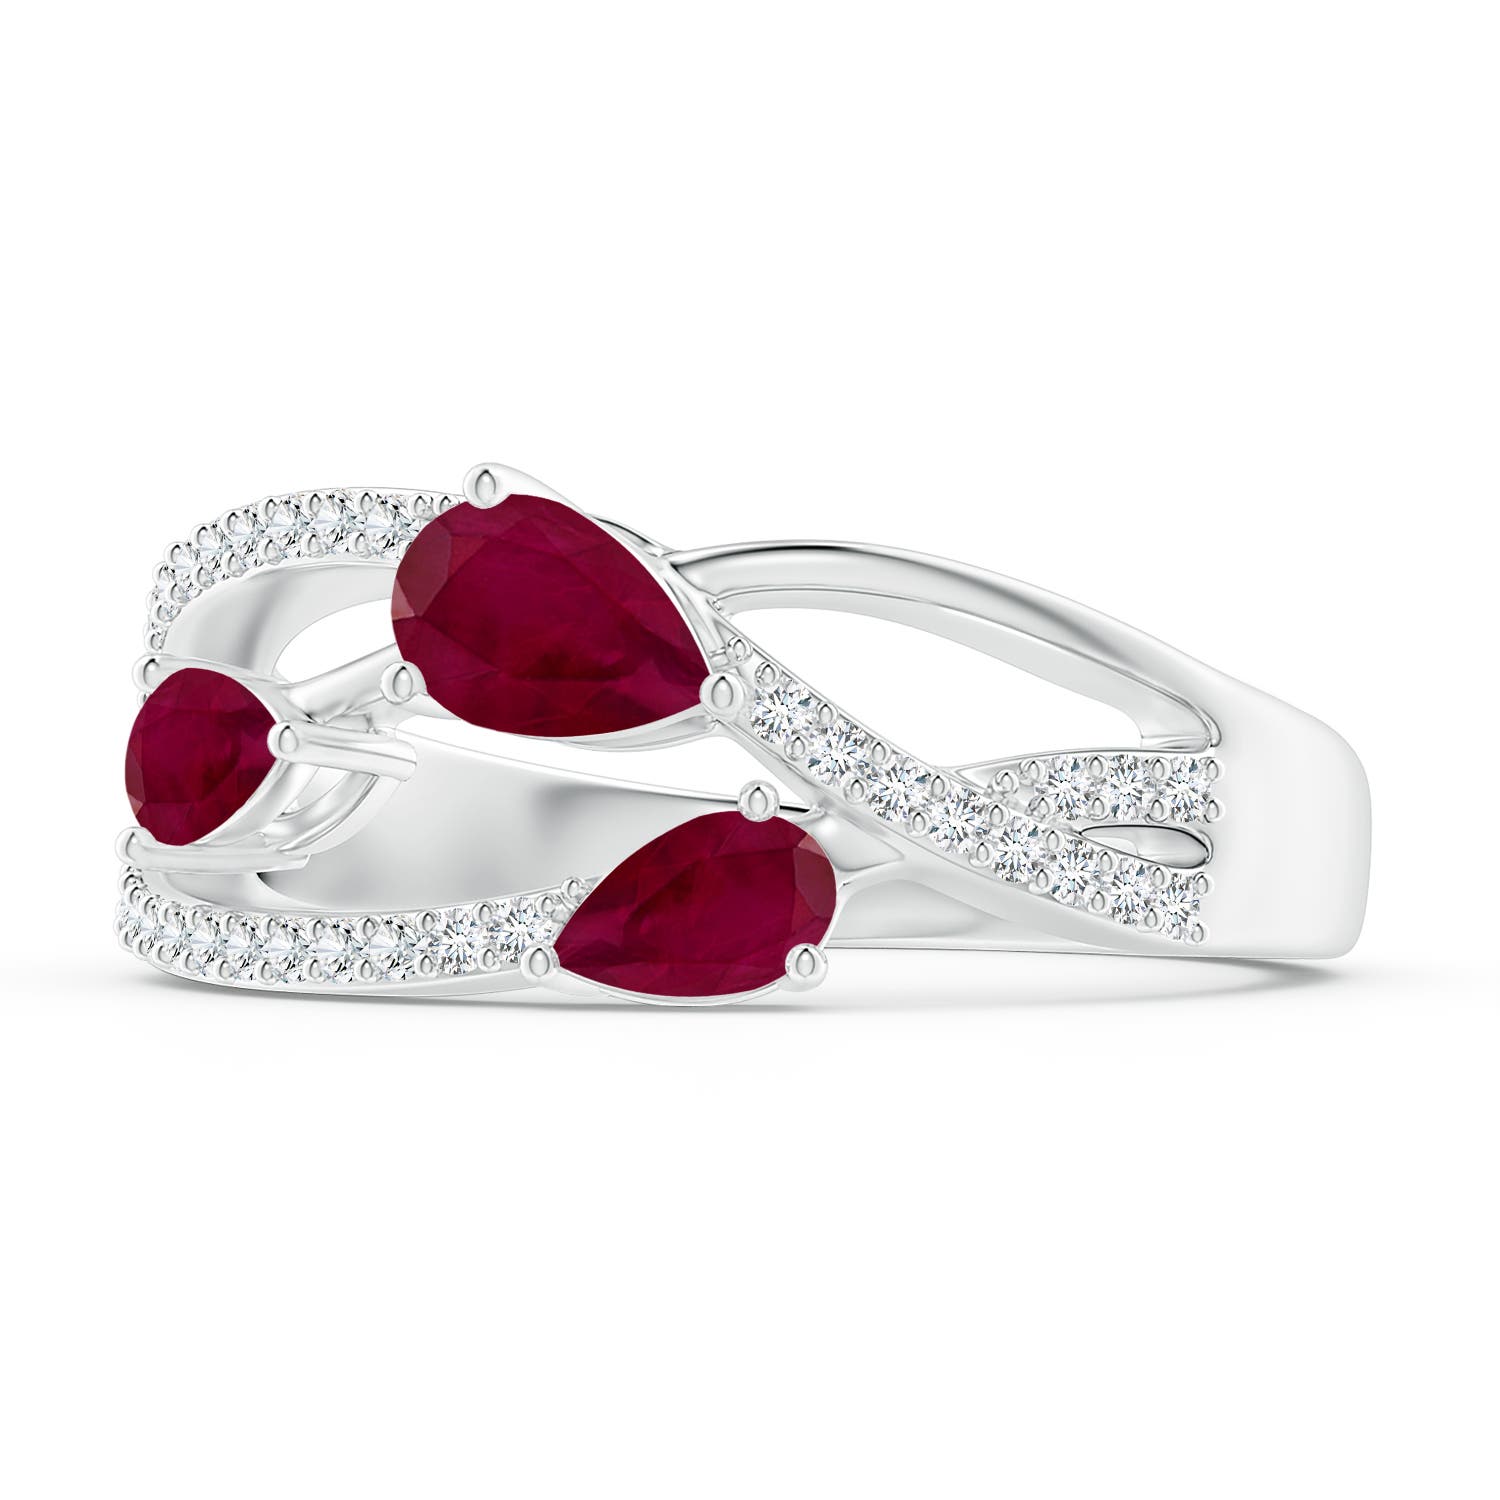 A - Ruby / 1.03 CT / 14 KT White Gold